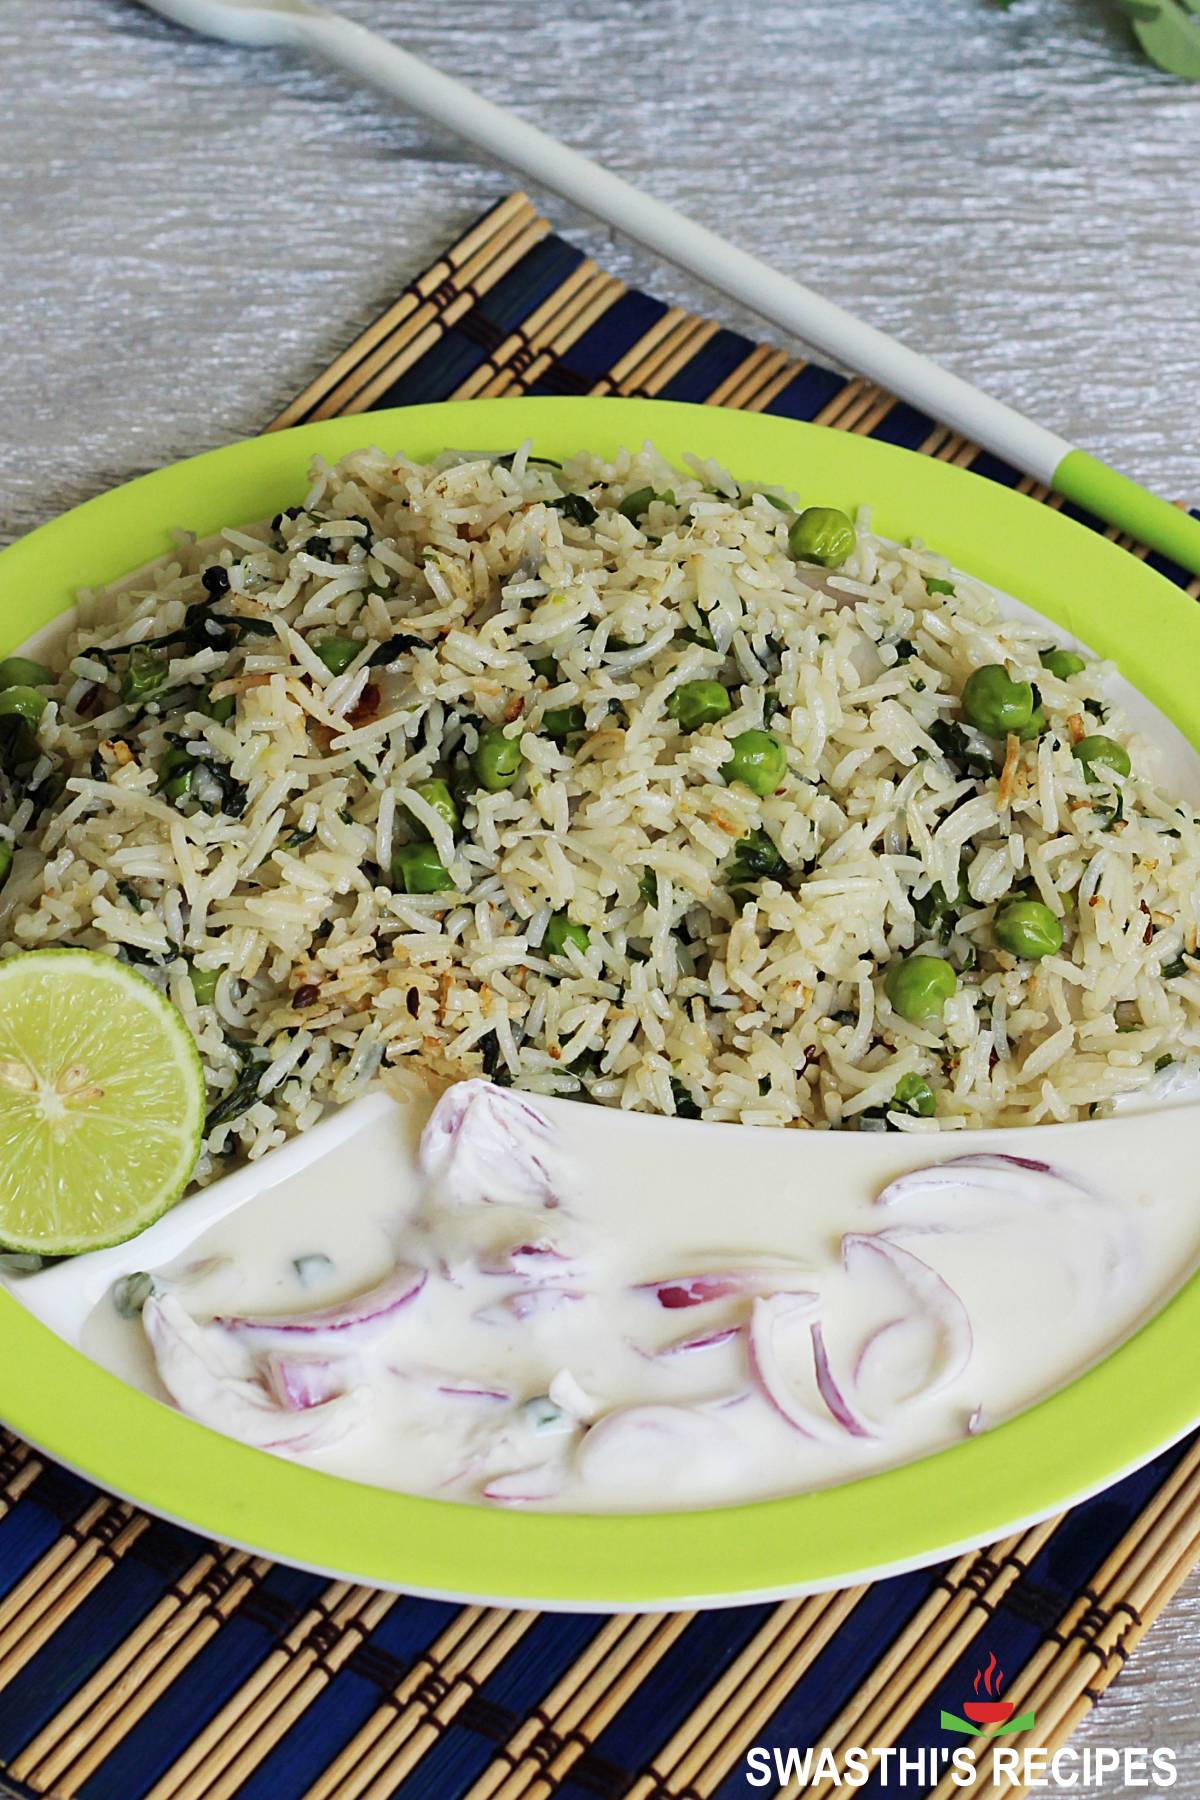 Methi pulao is rice pilaf cooked with fenugreek leaves